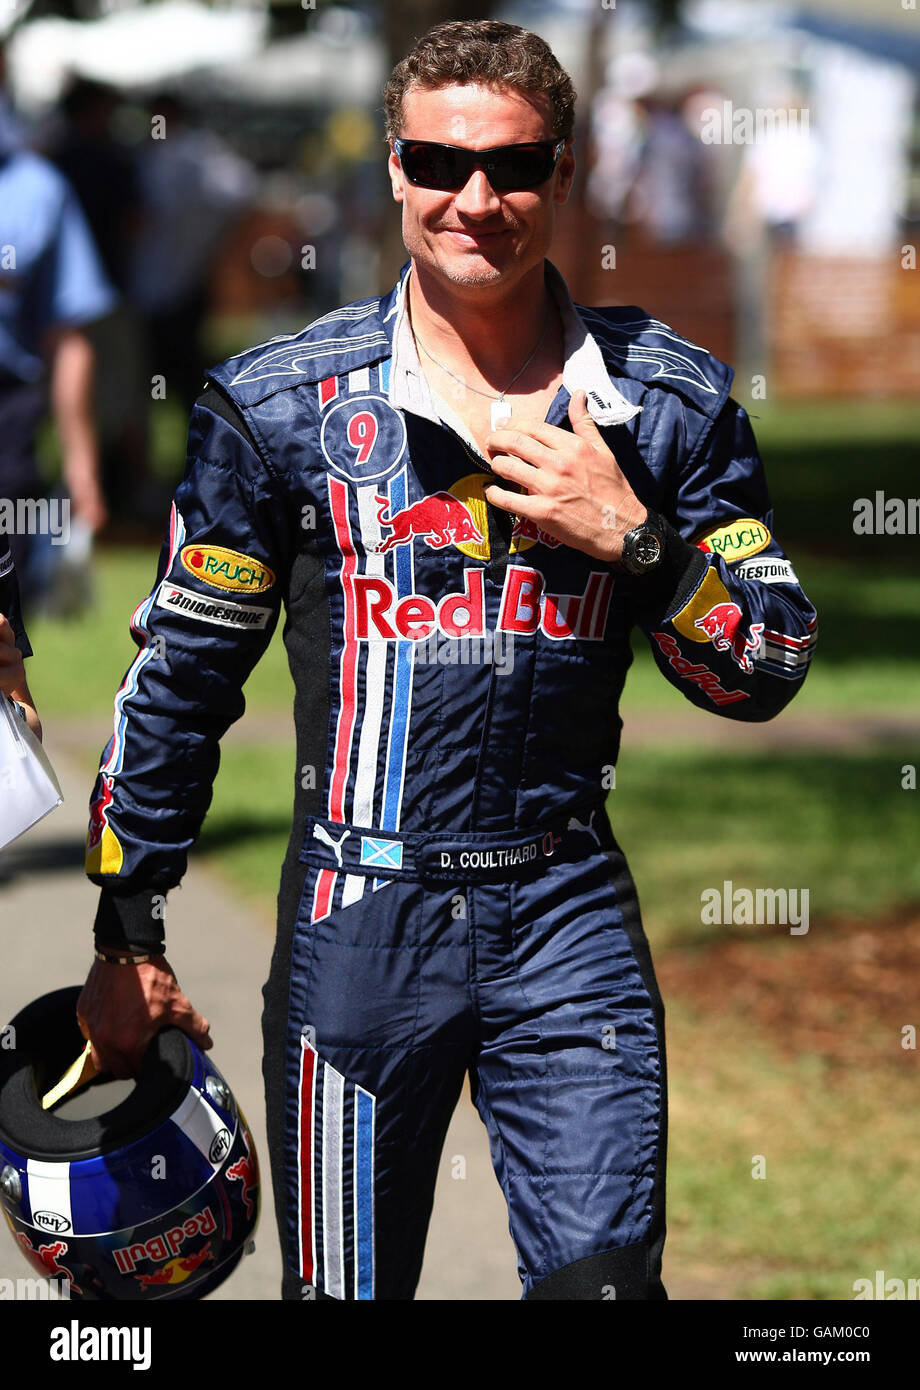 Red Bull Racing driver David Coulthard arrives in the F1 paddock at Albert Park, Melbourne prior to the Australian Grand Prix. Stock Photo